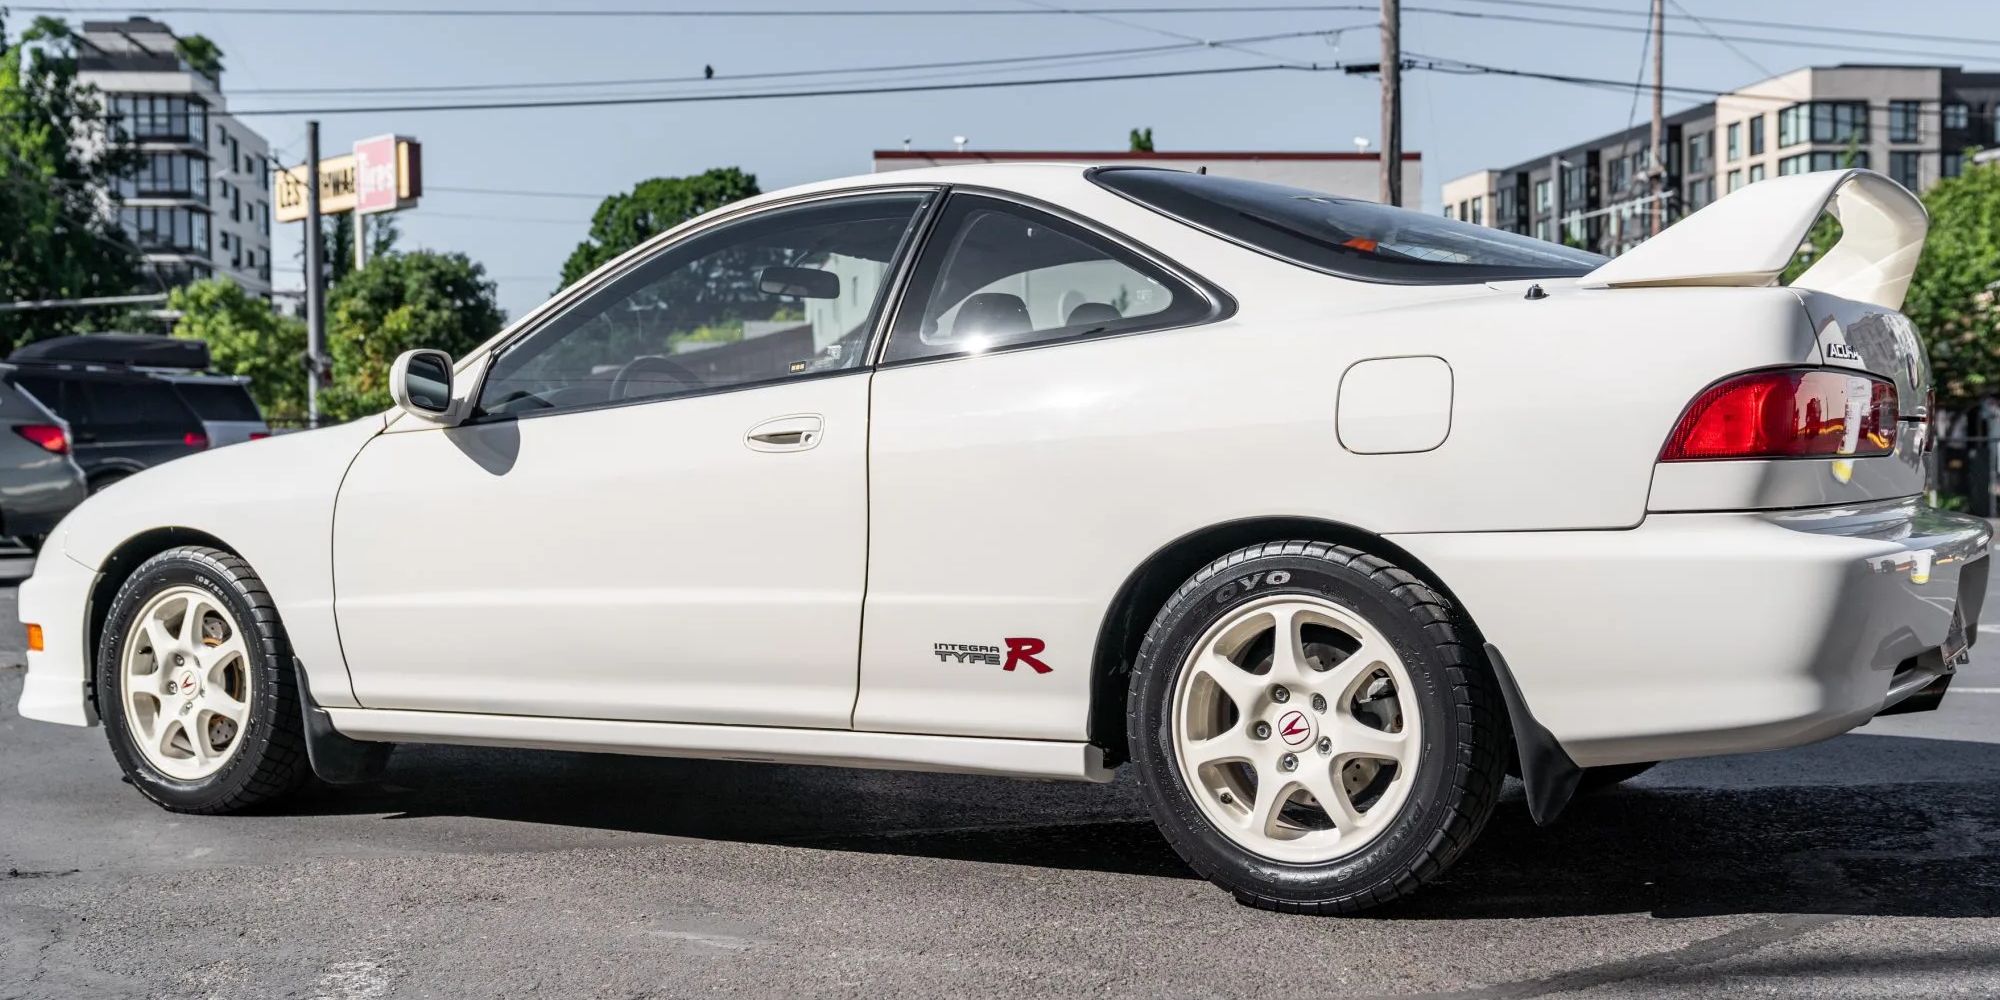 3/4 rear view of the Integra Type R, driver's side